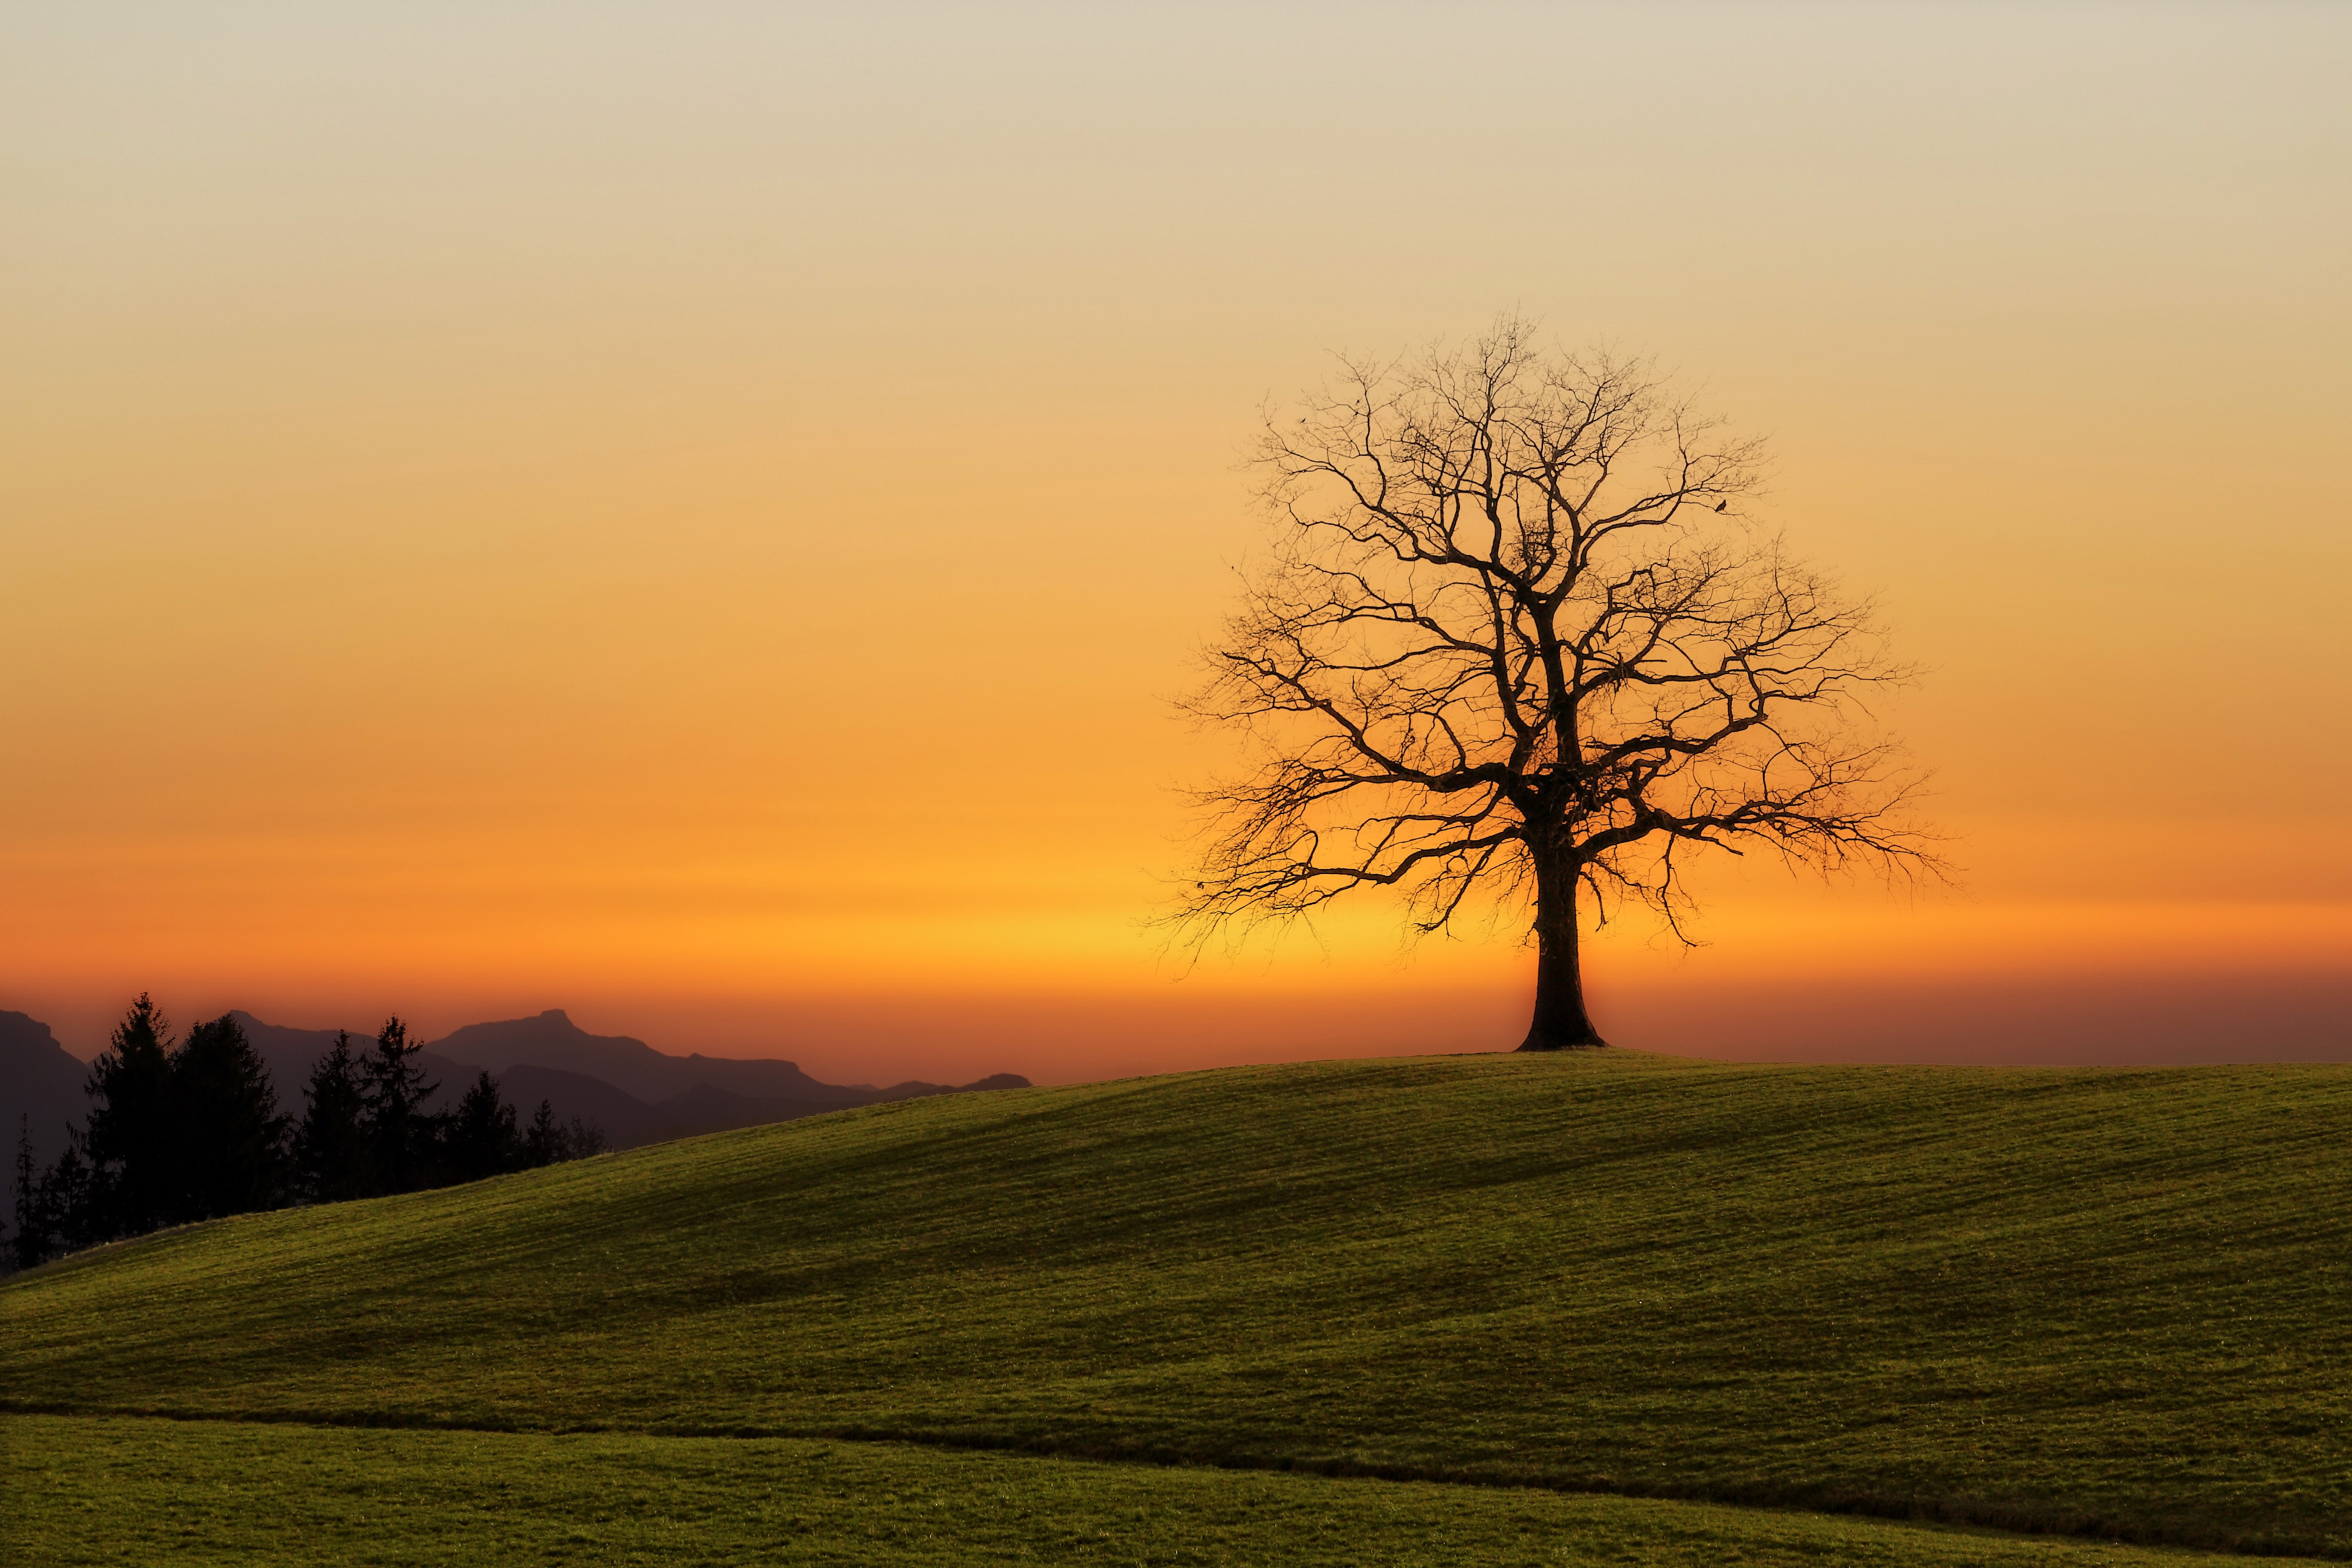 a sun setting over a hill with a tree, representing retirement and later stages in life